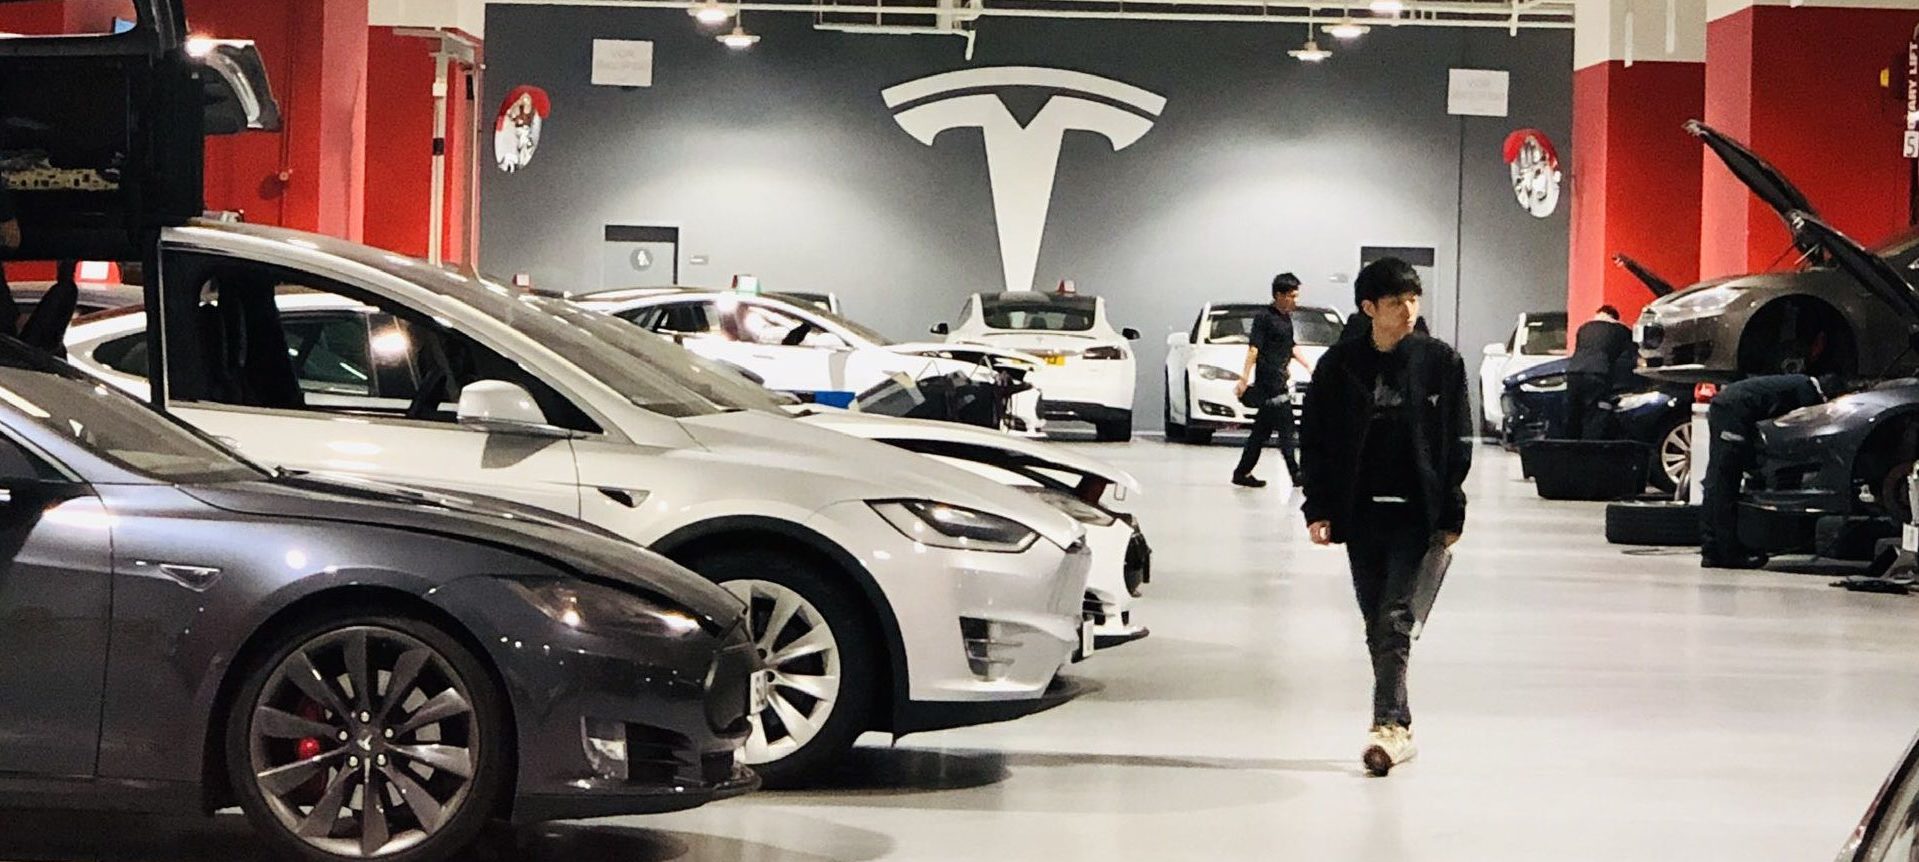 Tesla is addressing its repair service challenges by doubling capacity in 2019